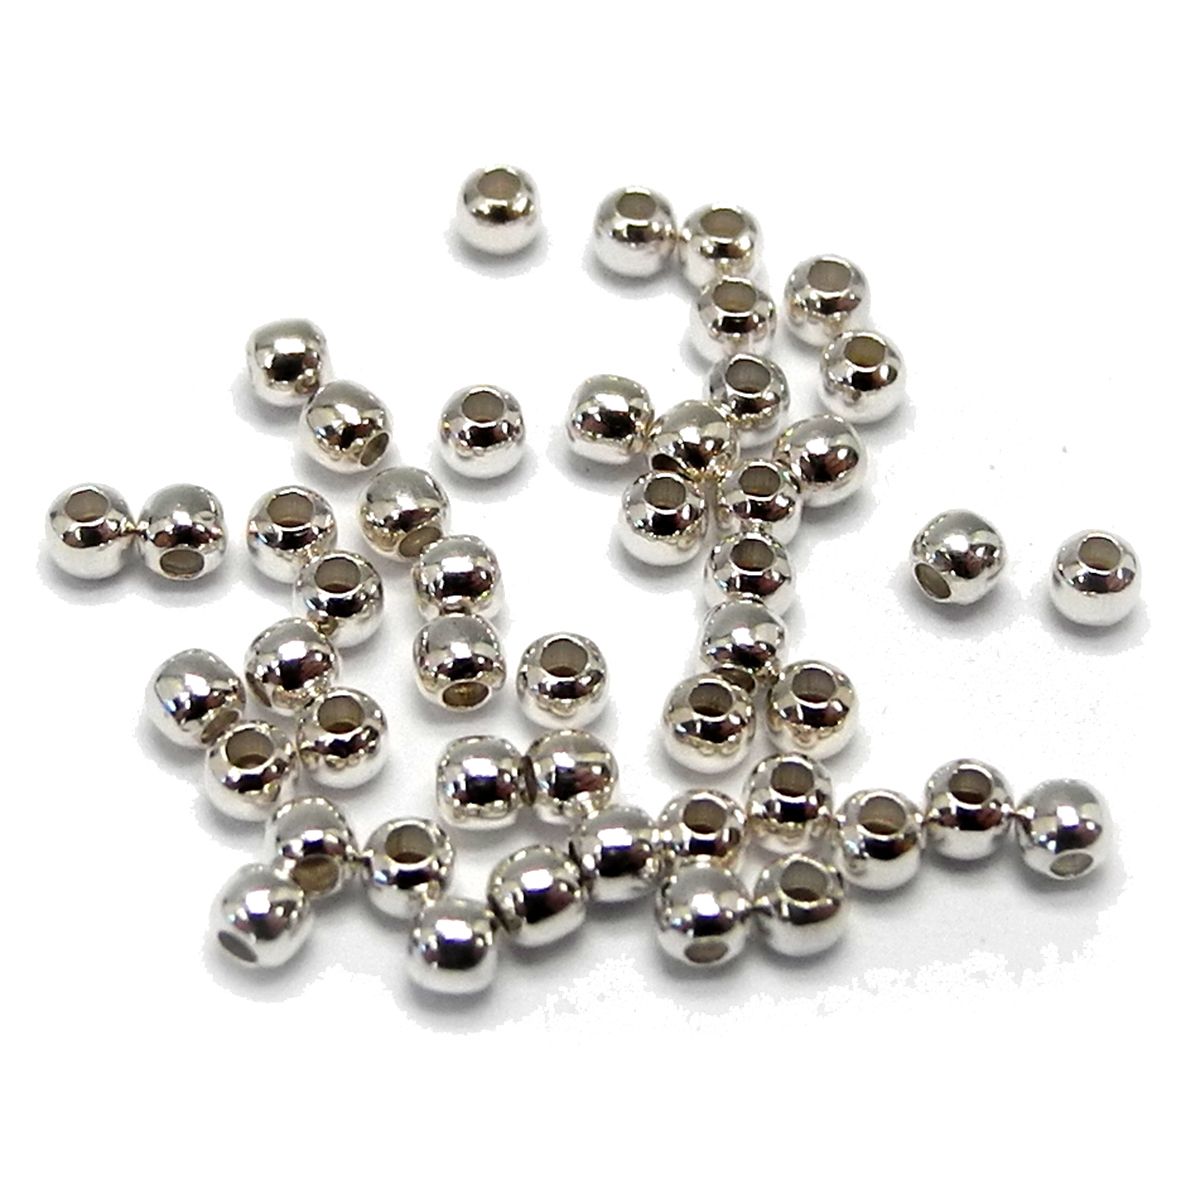 12 Packs: 150 ct. (1,800 total) 4mm Gold Clamshell Crimp Bead Covers by  Bead Landing™ 